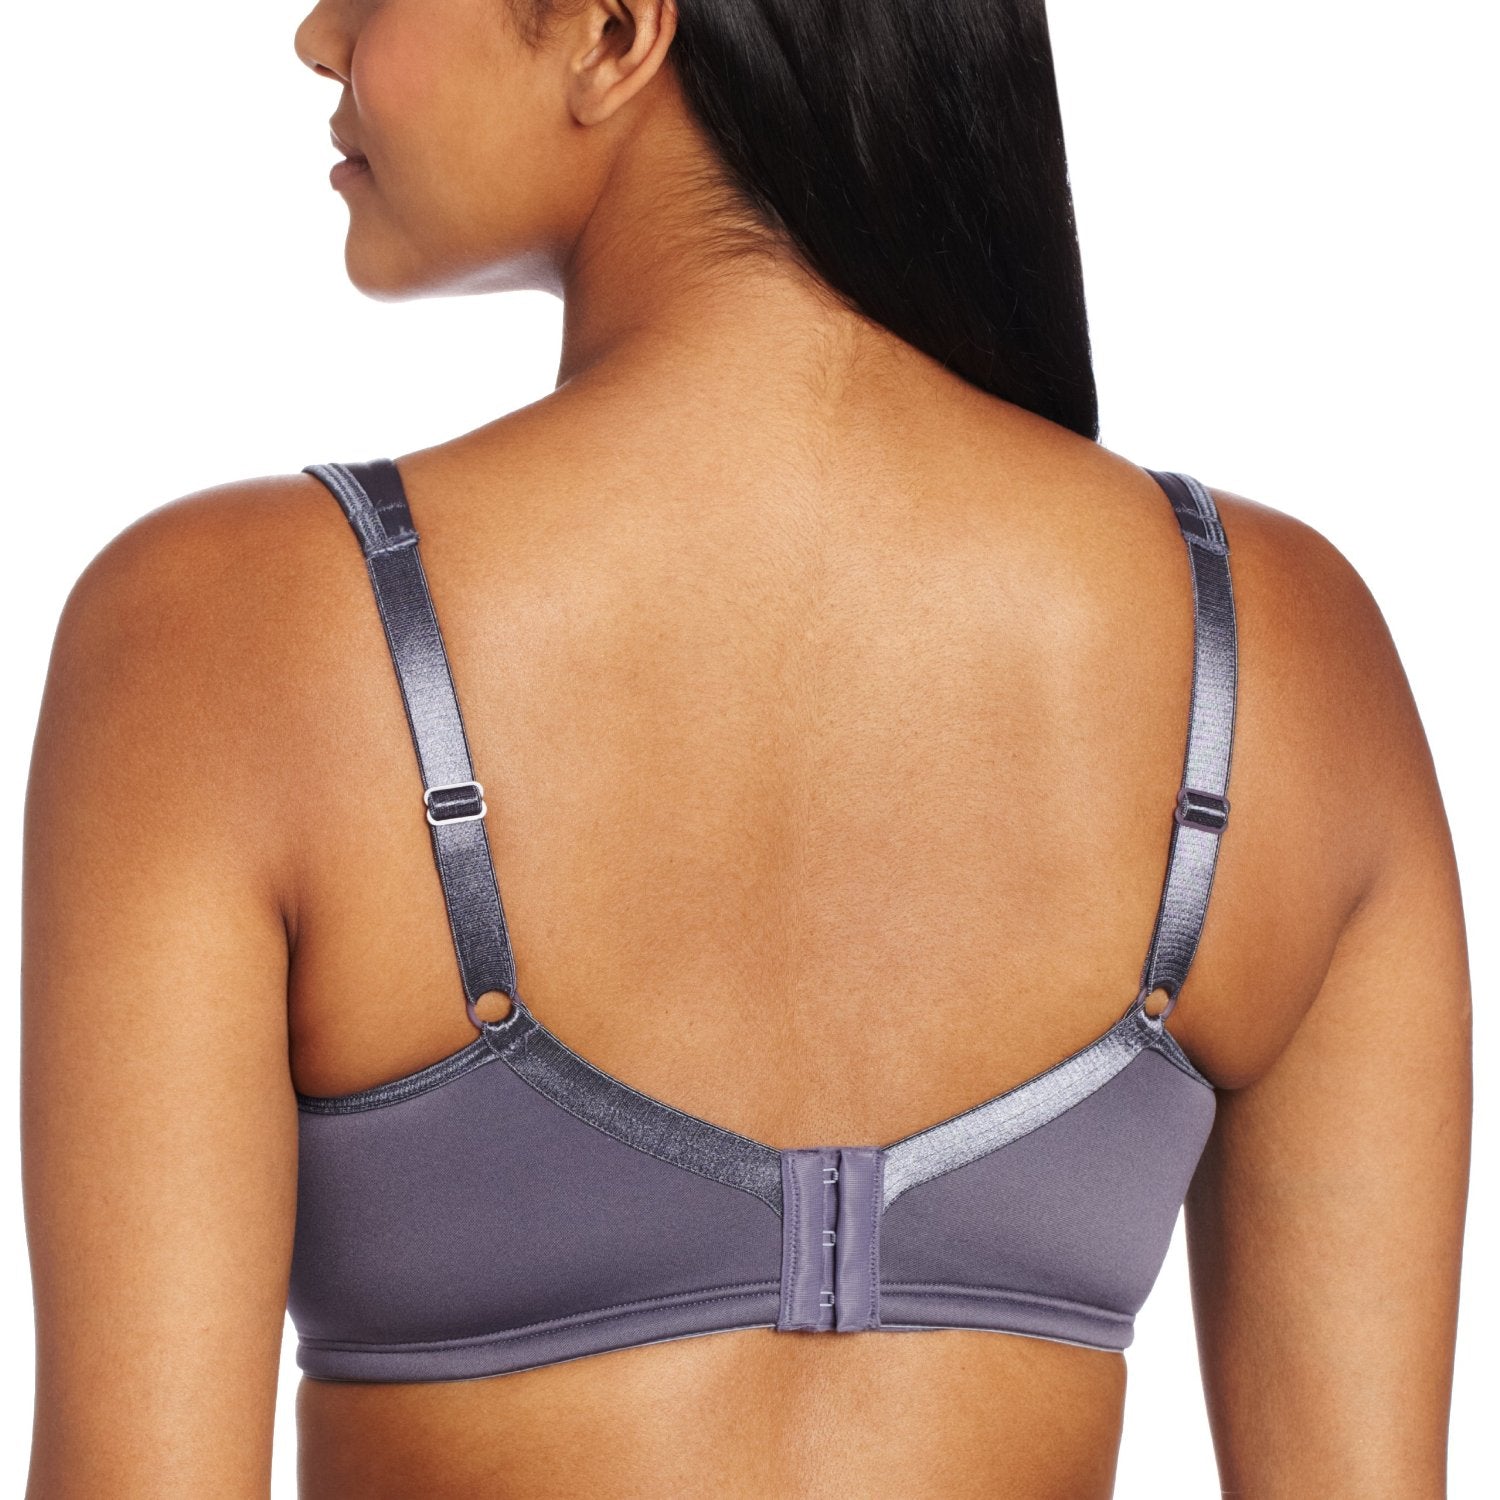 Playtex Secrets Perfectly Smooth Bra Wirefree 3 Clasp 4707 Nude 44c for  sale online